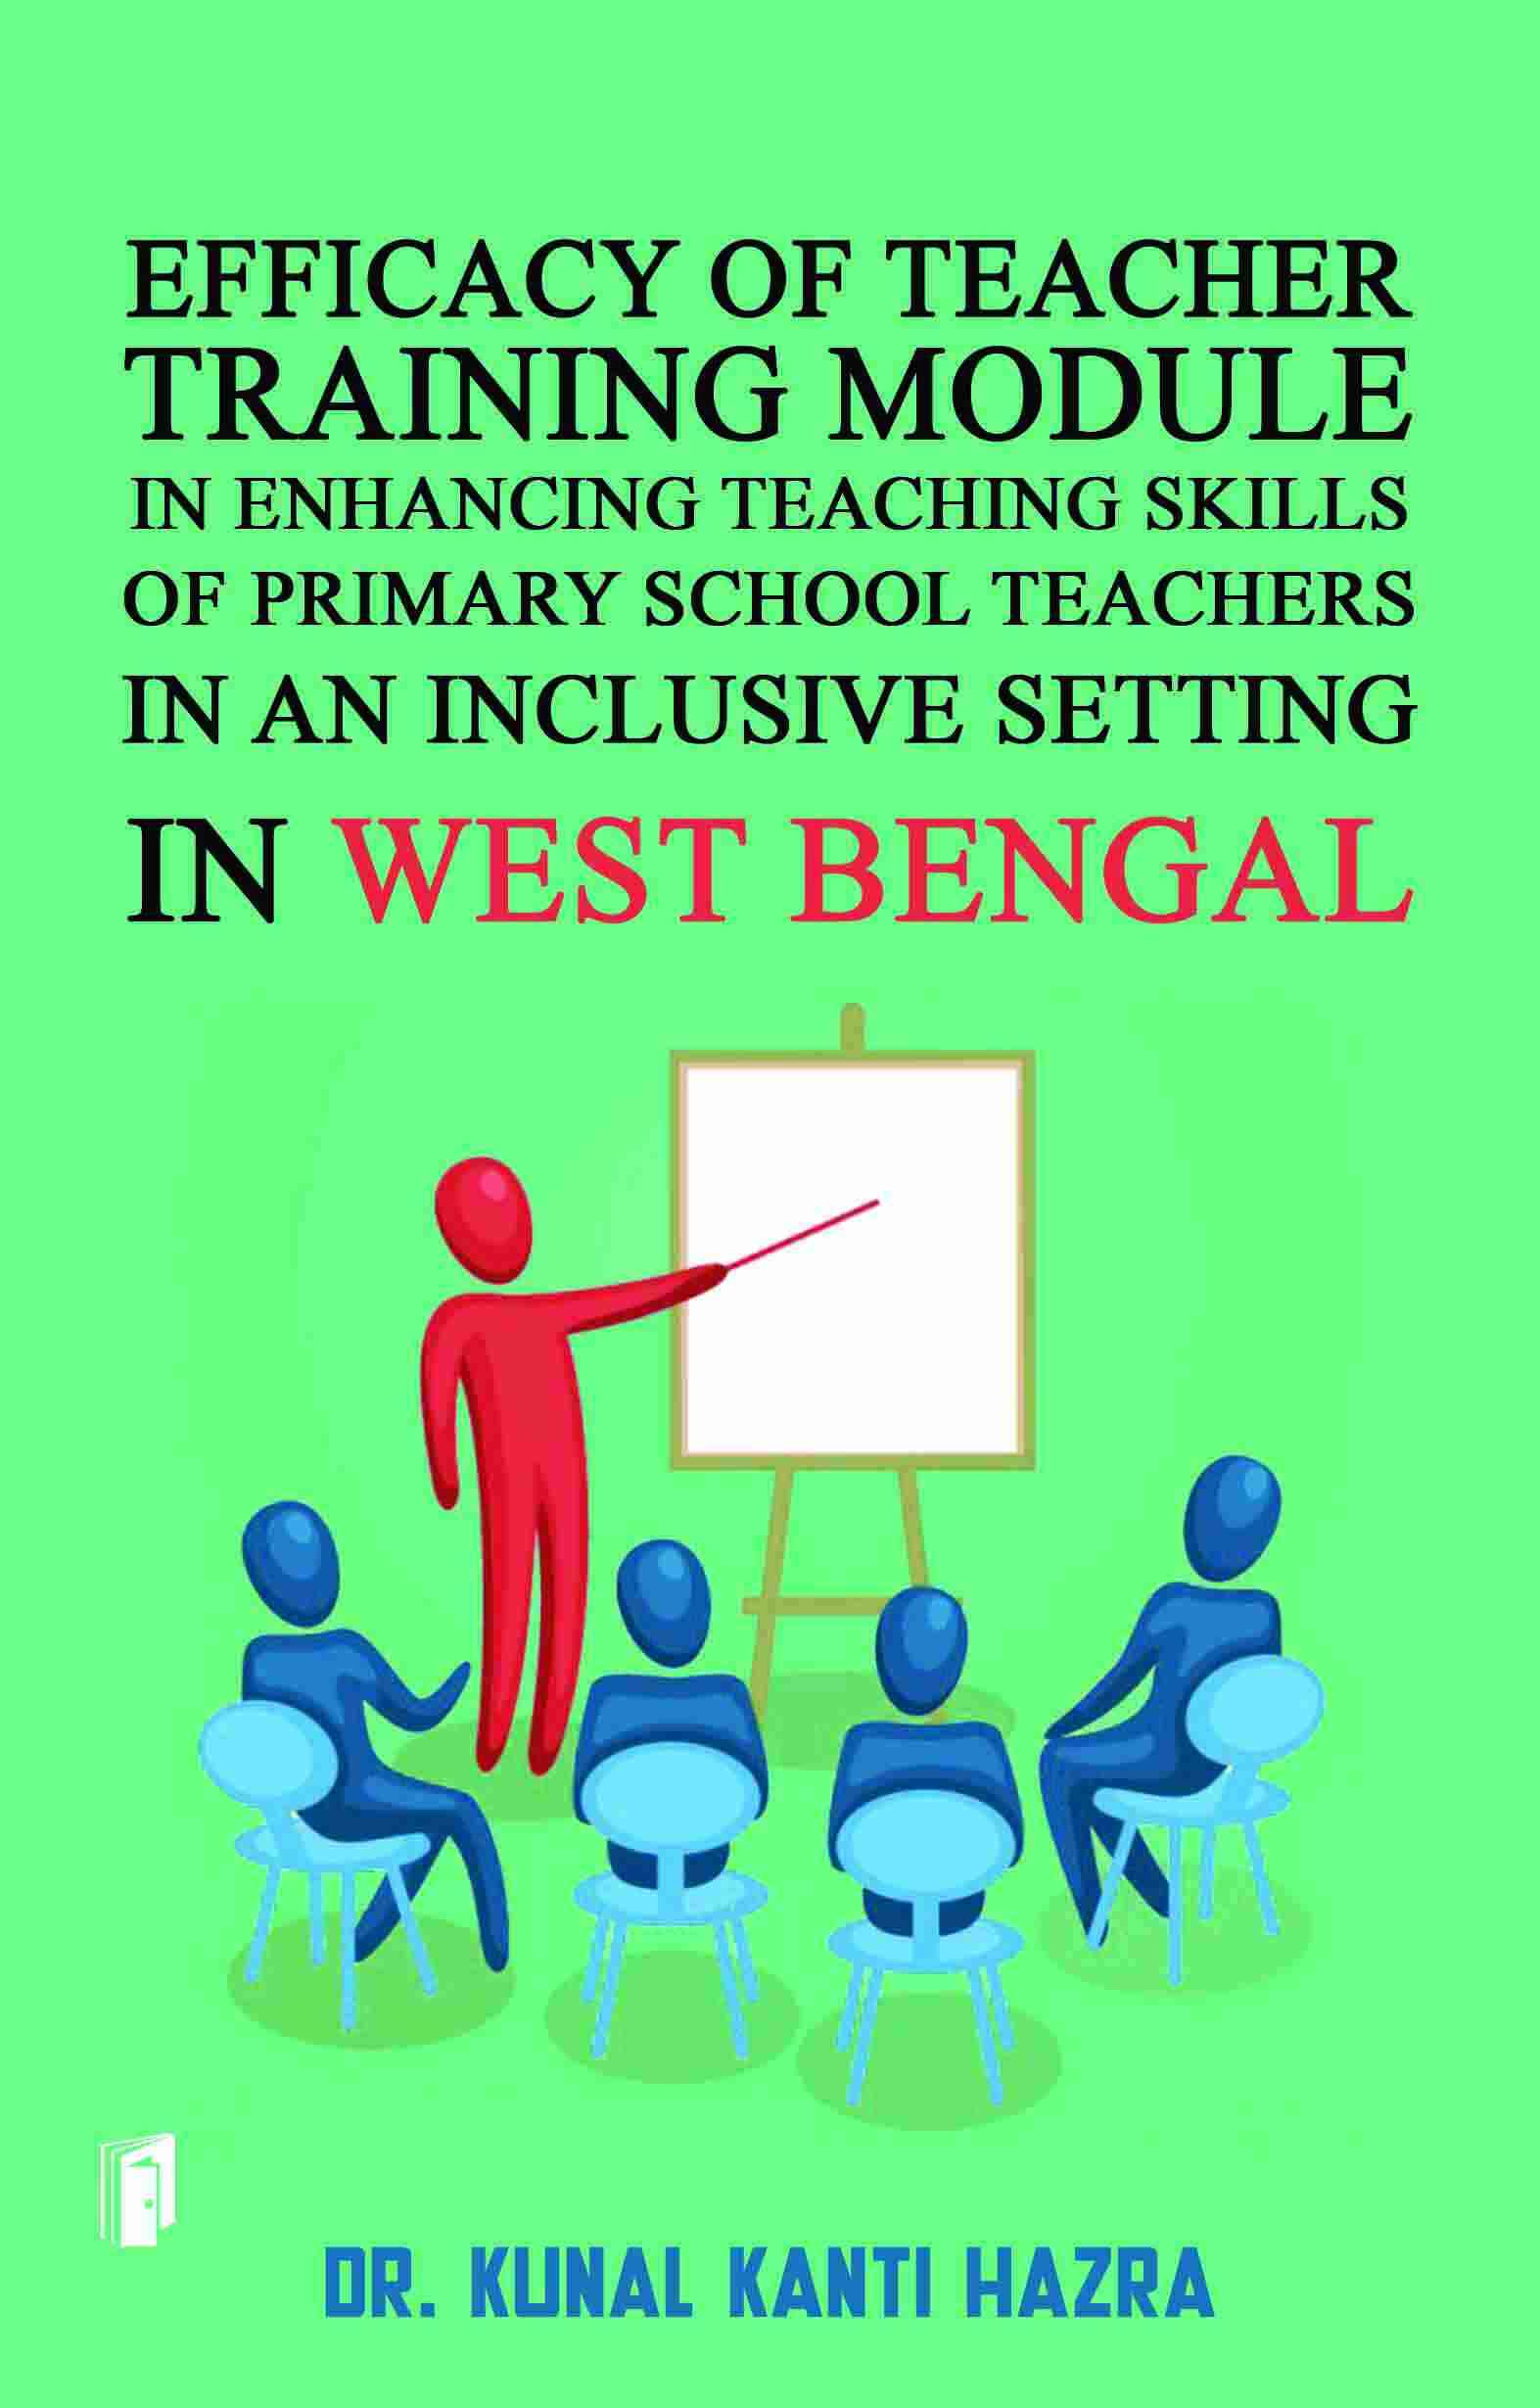 EFFICACY OF TEACHER TRAINING MODULE IN ENHANCING TEACHING SKILLS OF PRIMARY SCHOOL TEACHERS IN AN INCLUSIVE SETTING IN WEST BENGAL